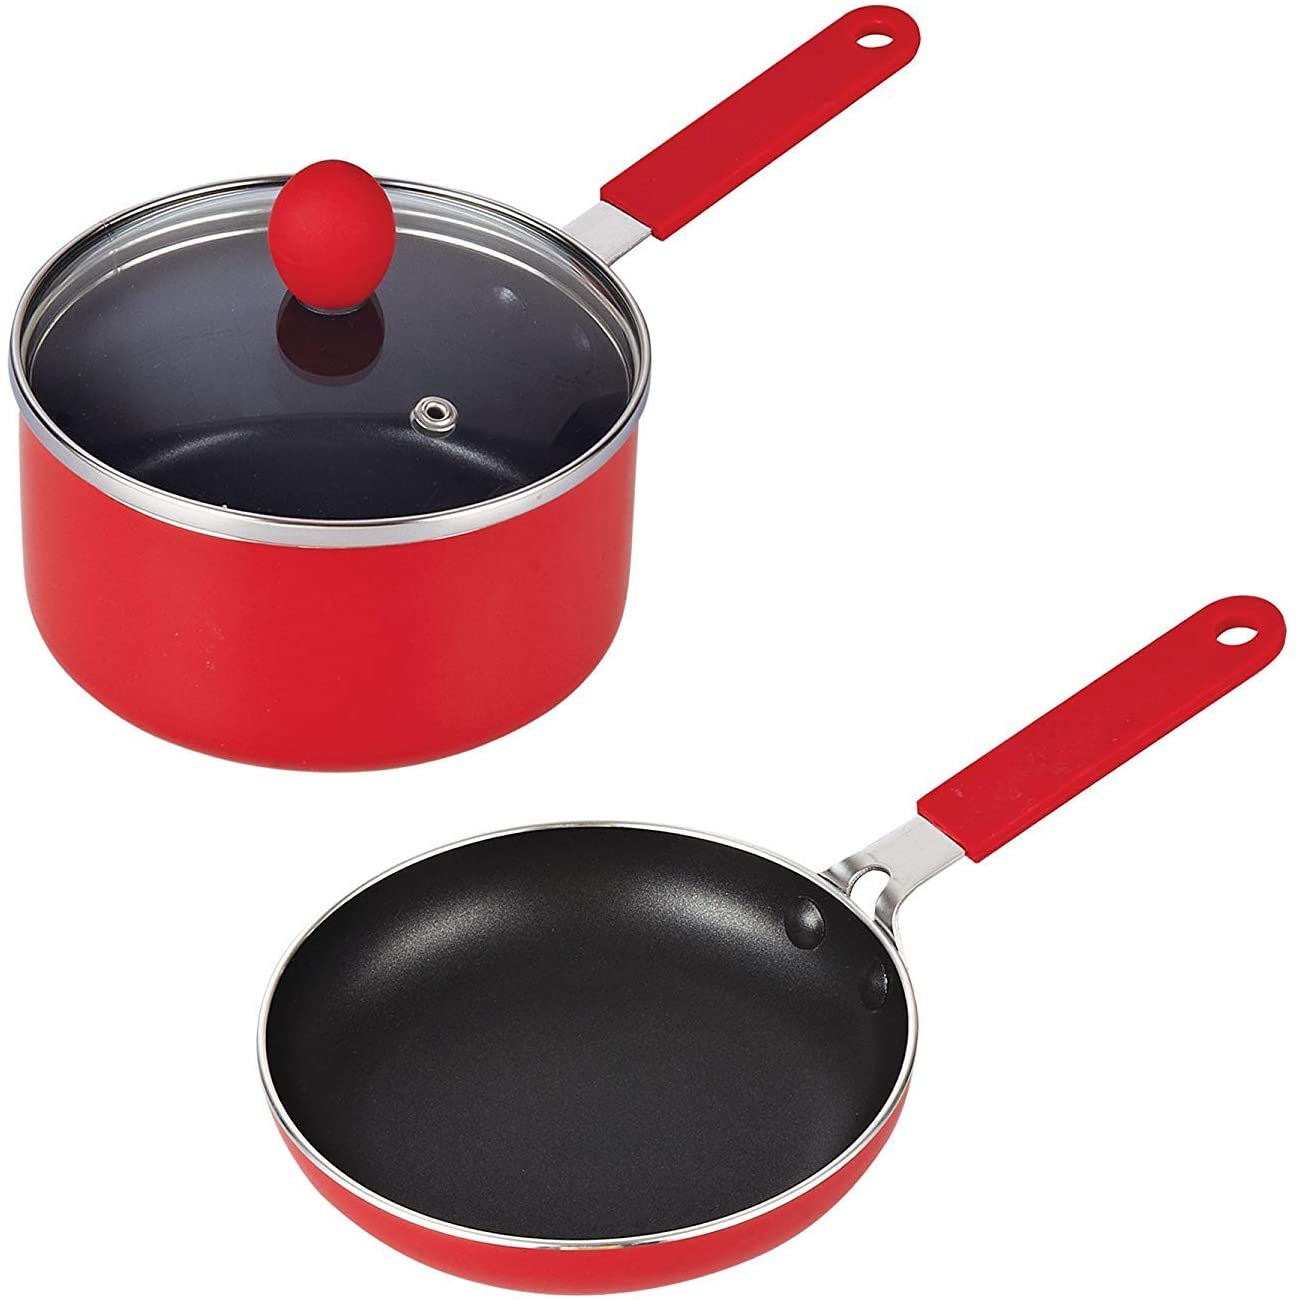  SODAY 1 Pcs 1.5 Qt Sauce Pan with Lid, Small Nonstick